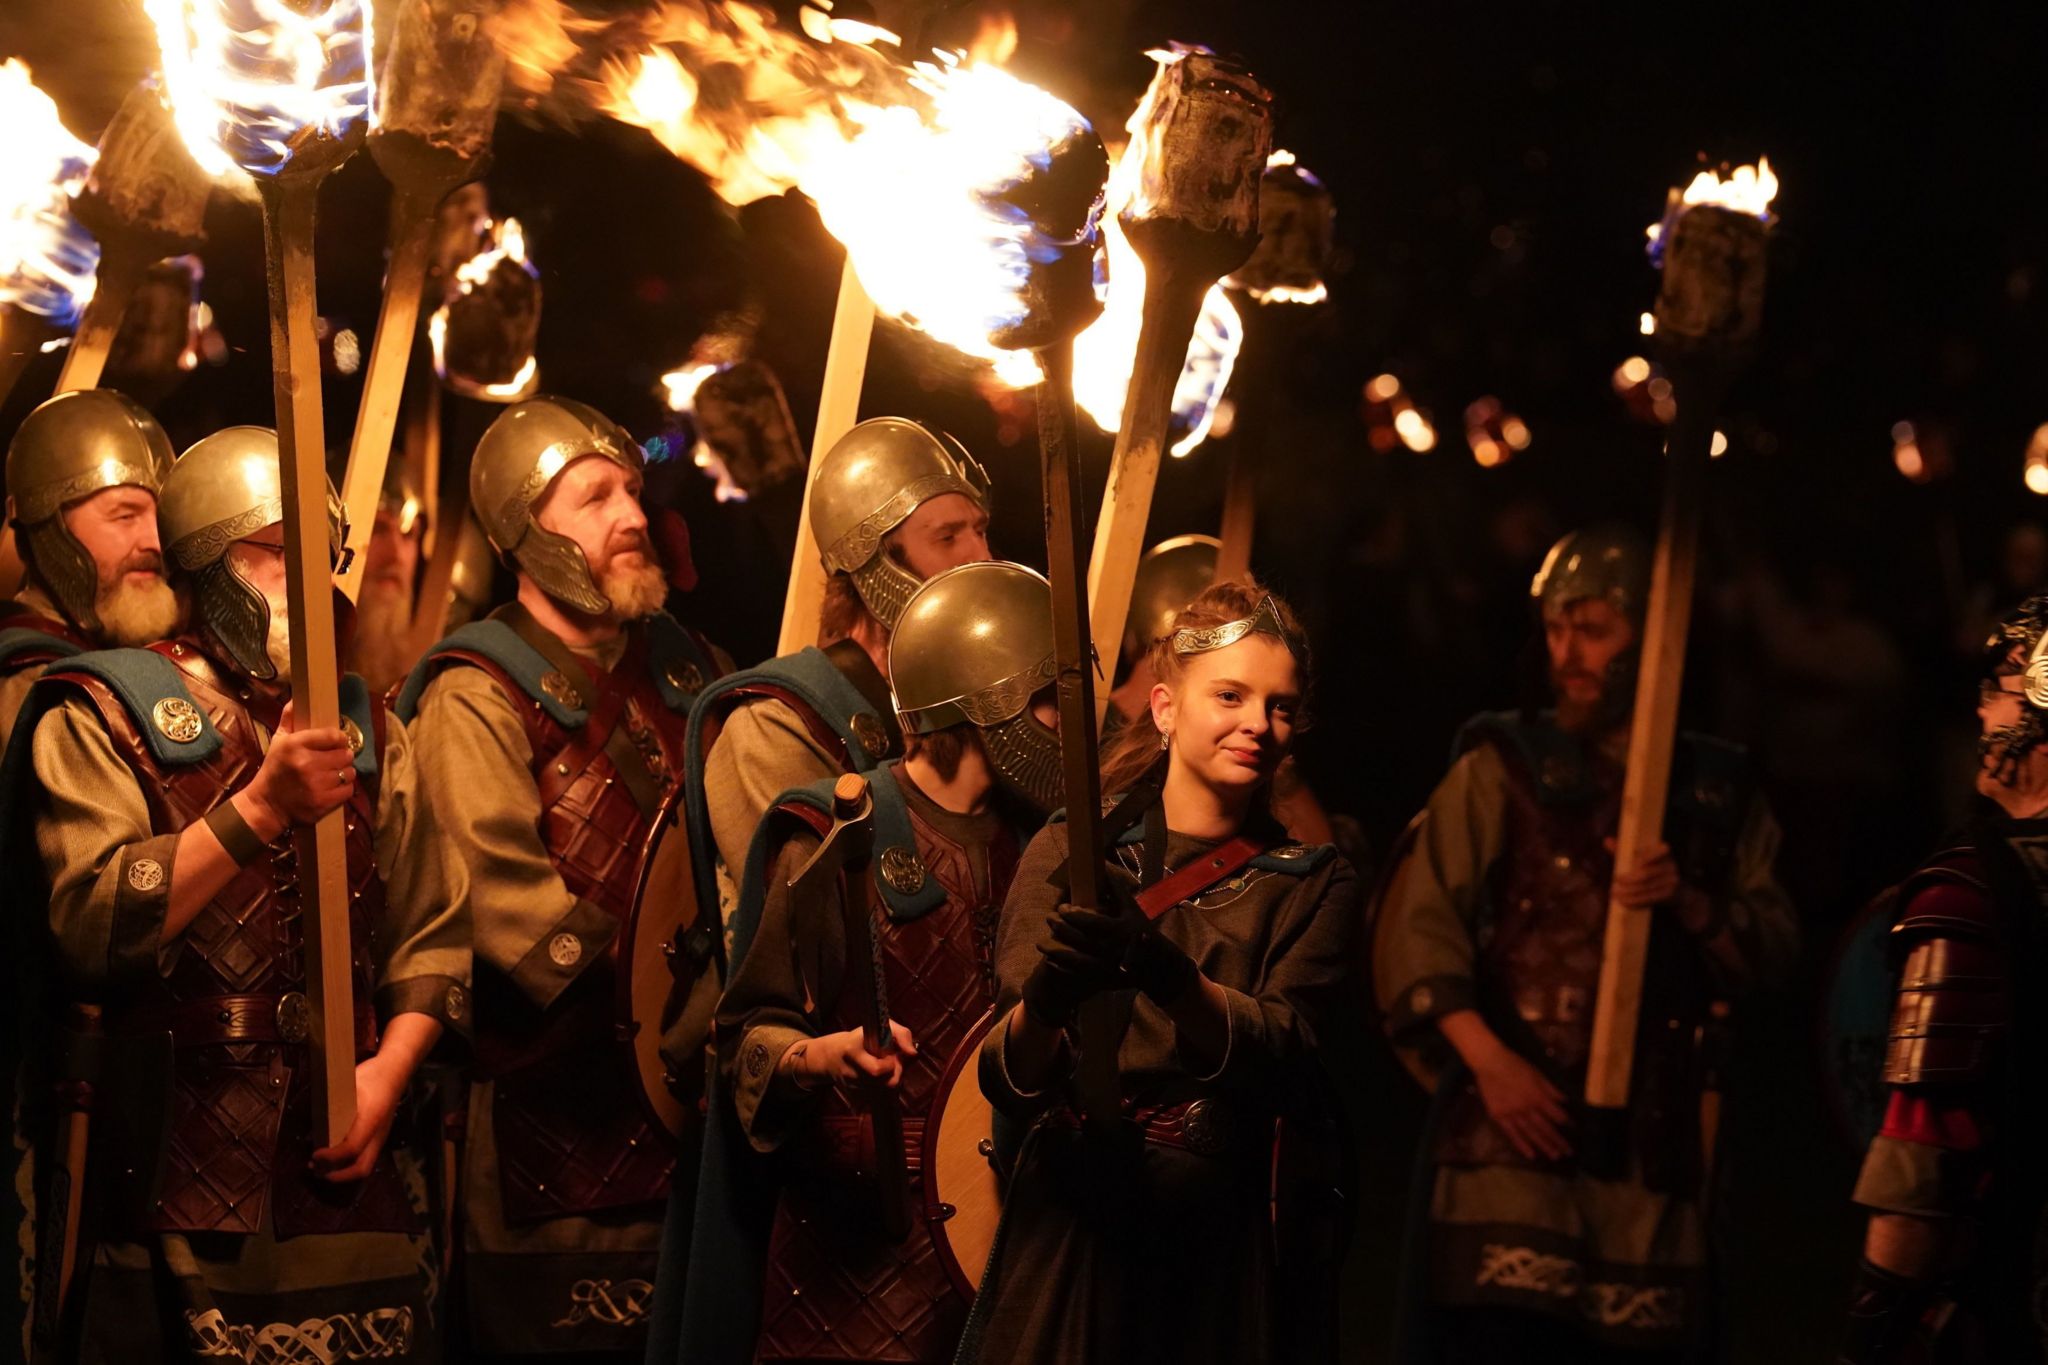 The Jarl Squad lit the galley during the celebration in Lerwick